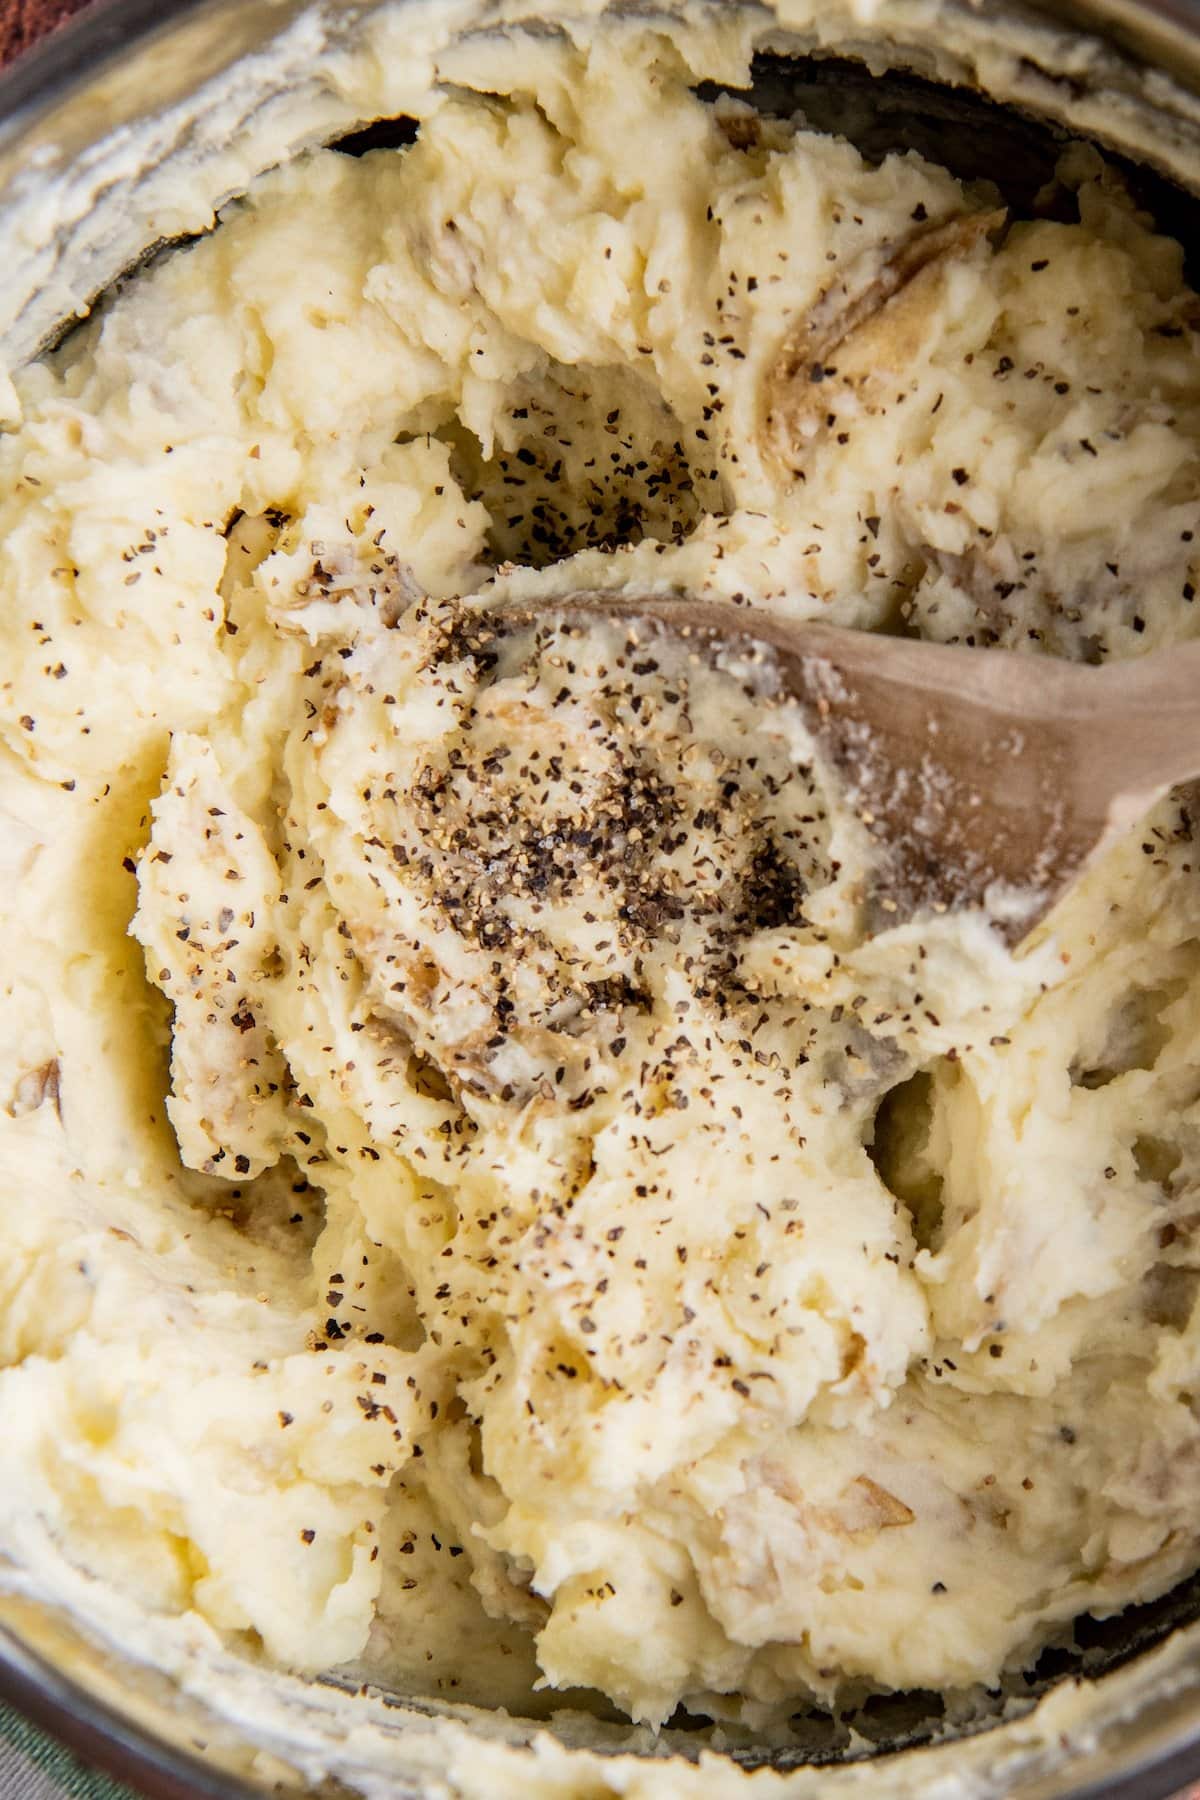 Salt and pepper added to mashed potatoes with a wooden spoon stirring them.